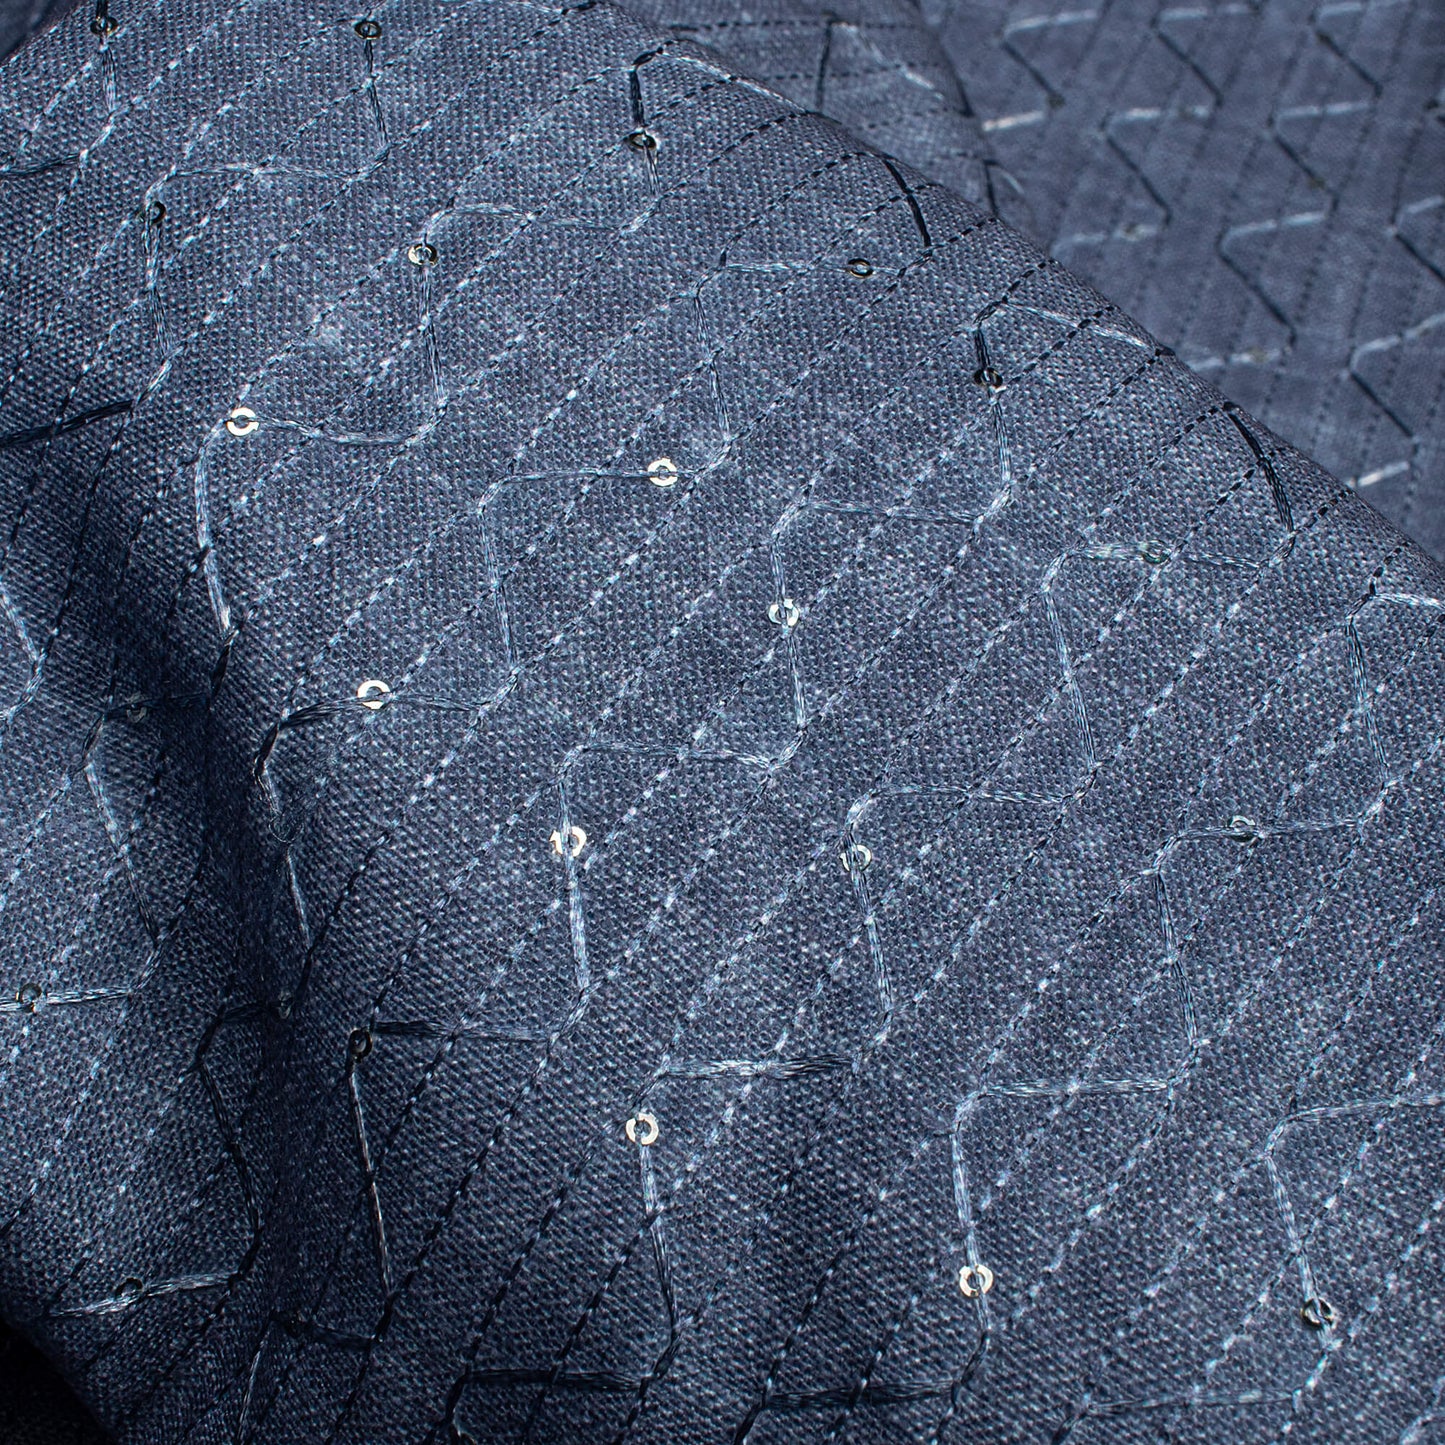 Slate Grey Texture Pattern Sequins Embroidery Digital Print Linen Textured Fabric (Width 52 Inches)